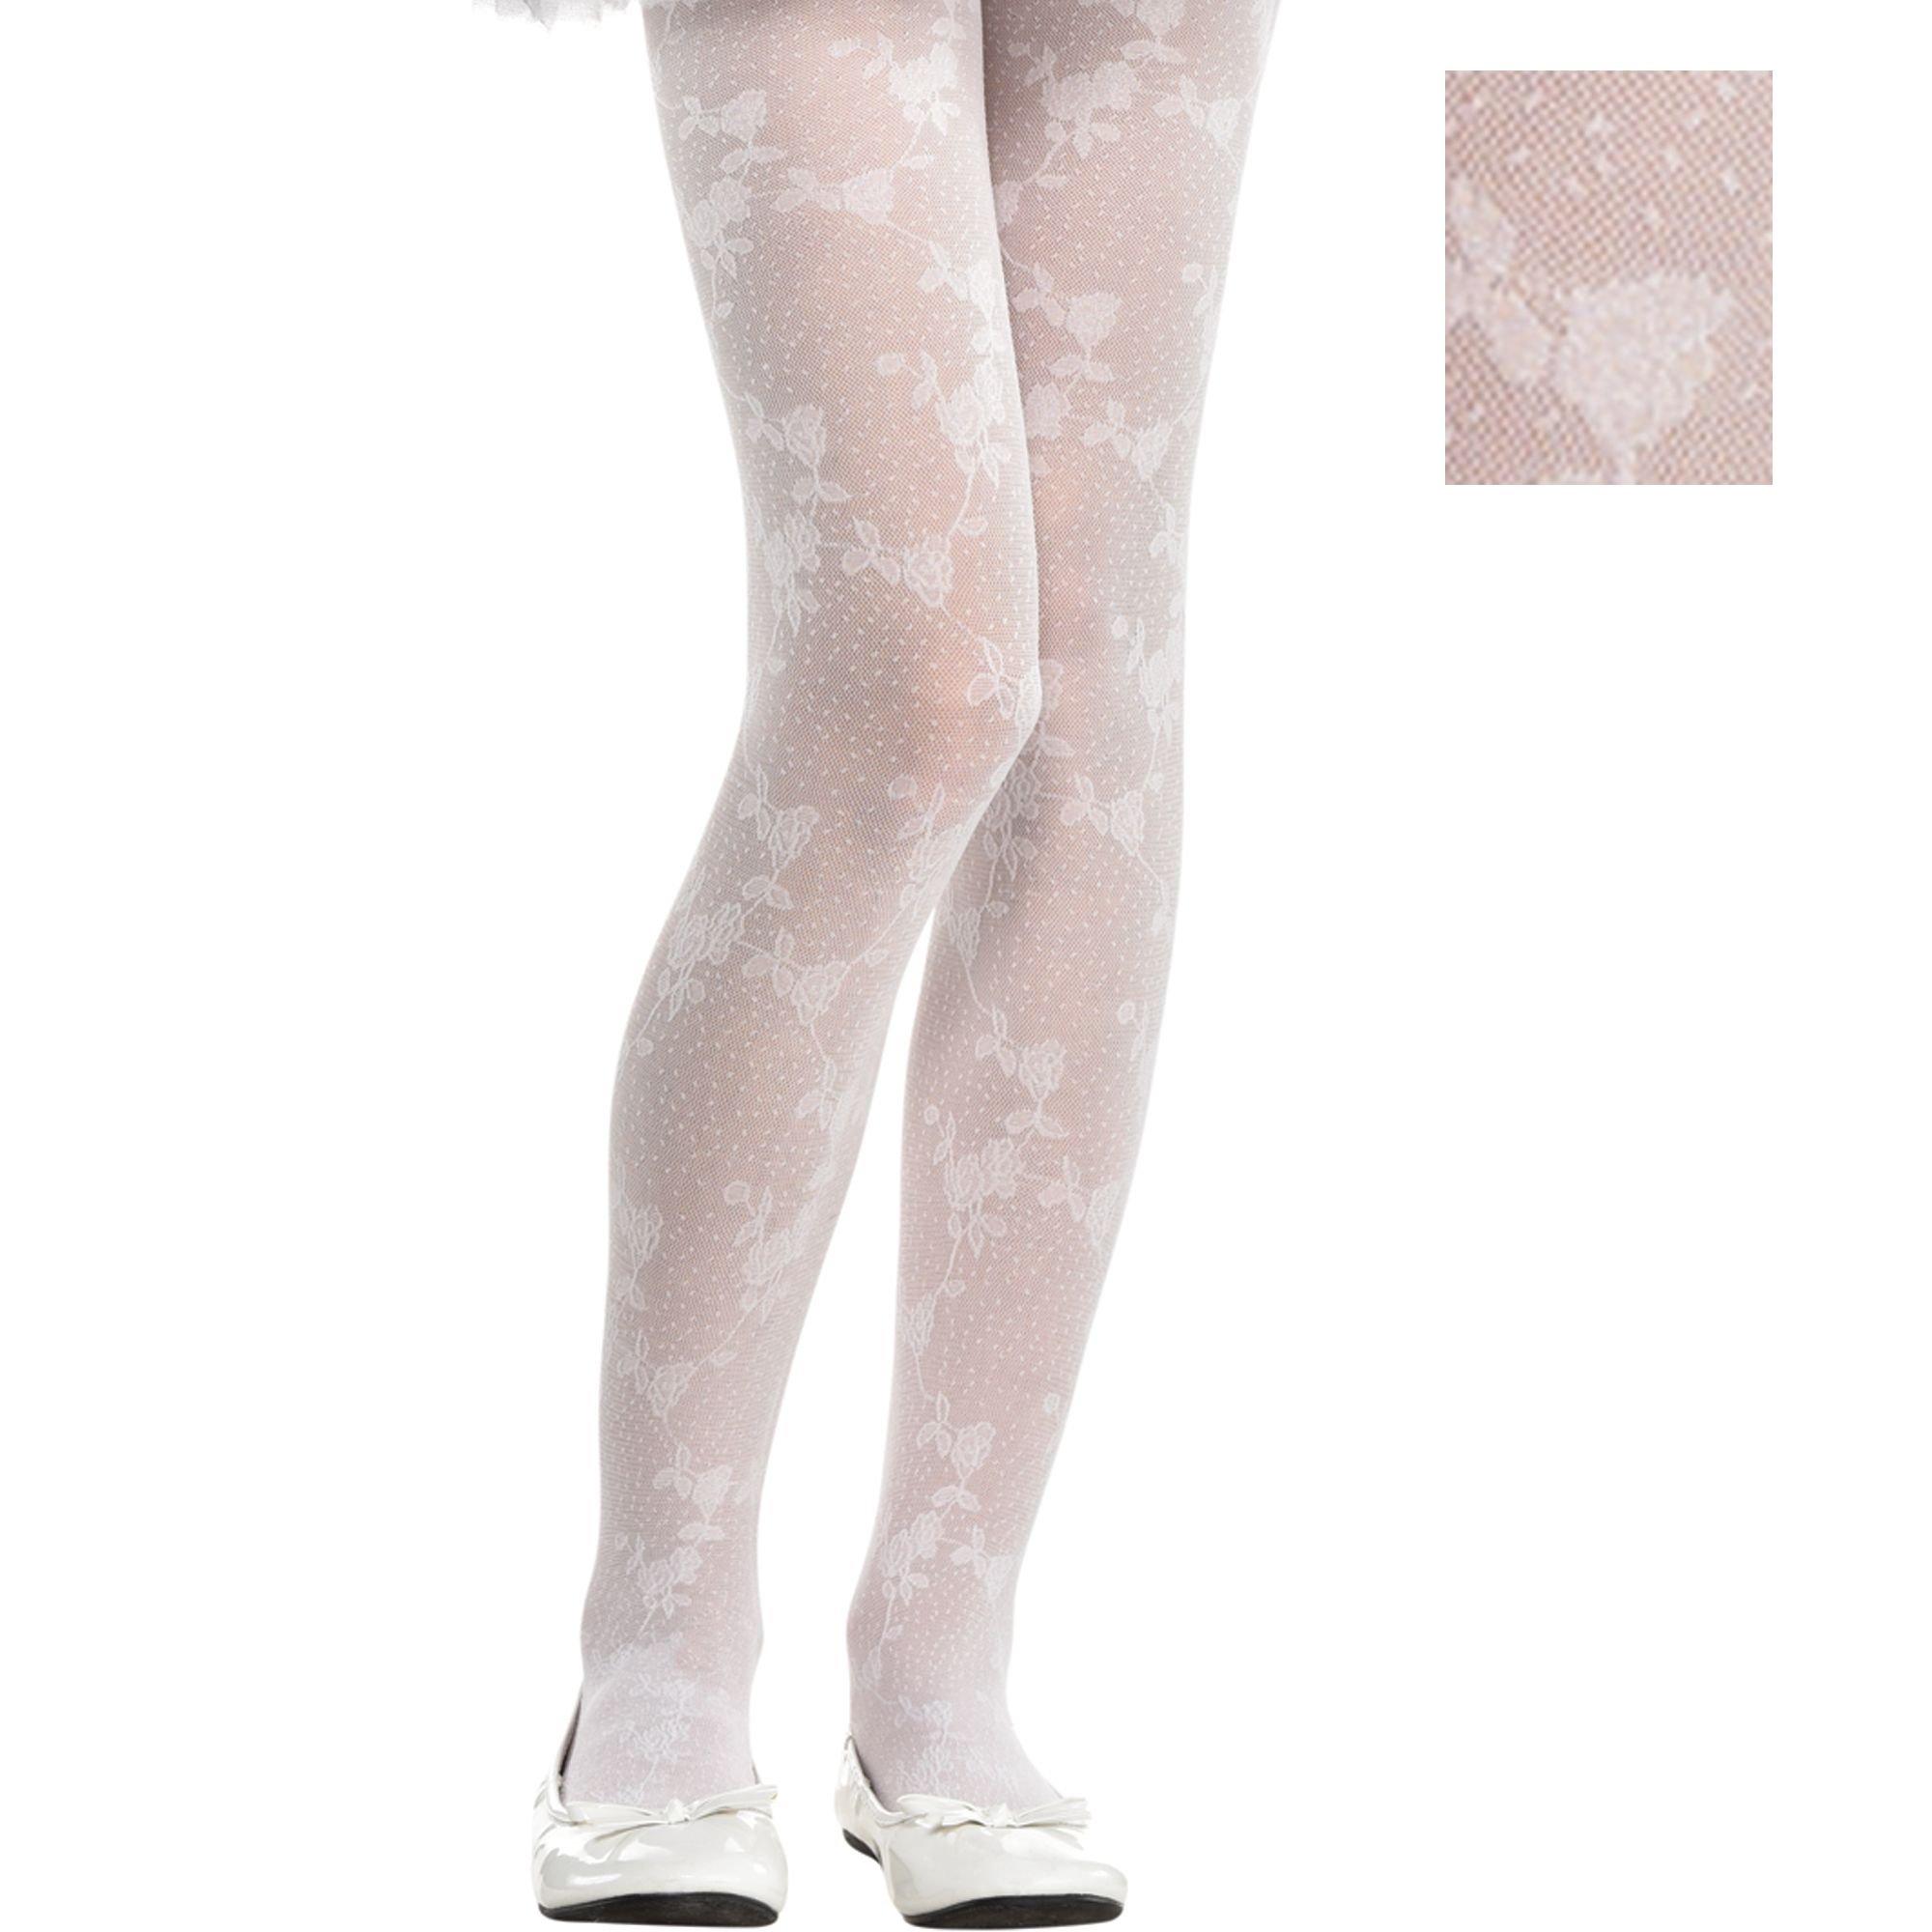 Kid's Deluxe White Tights